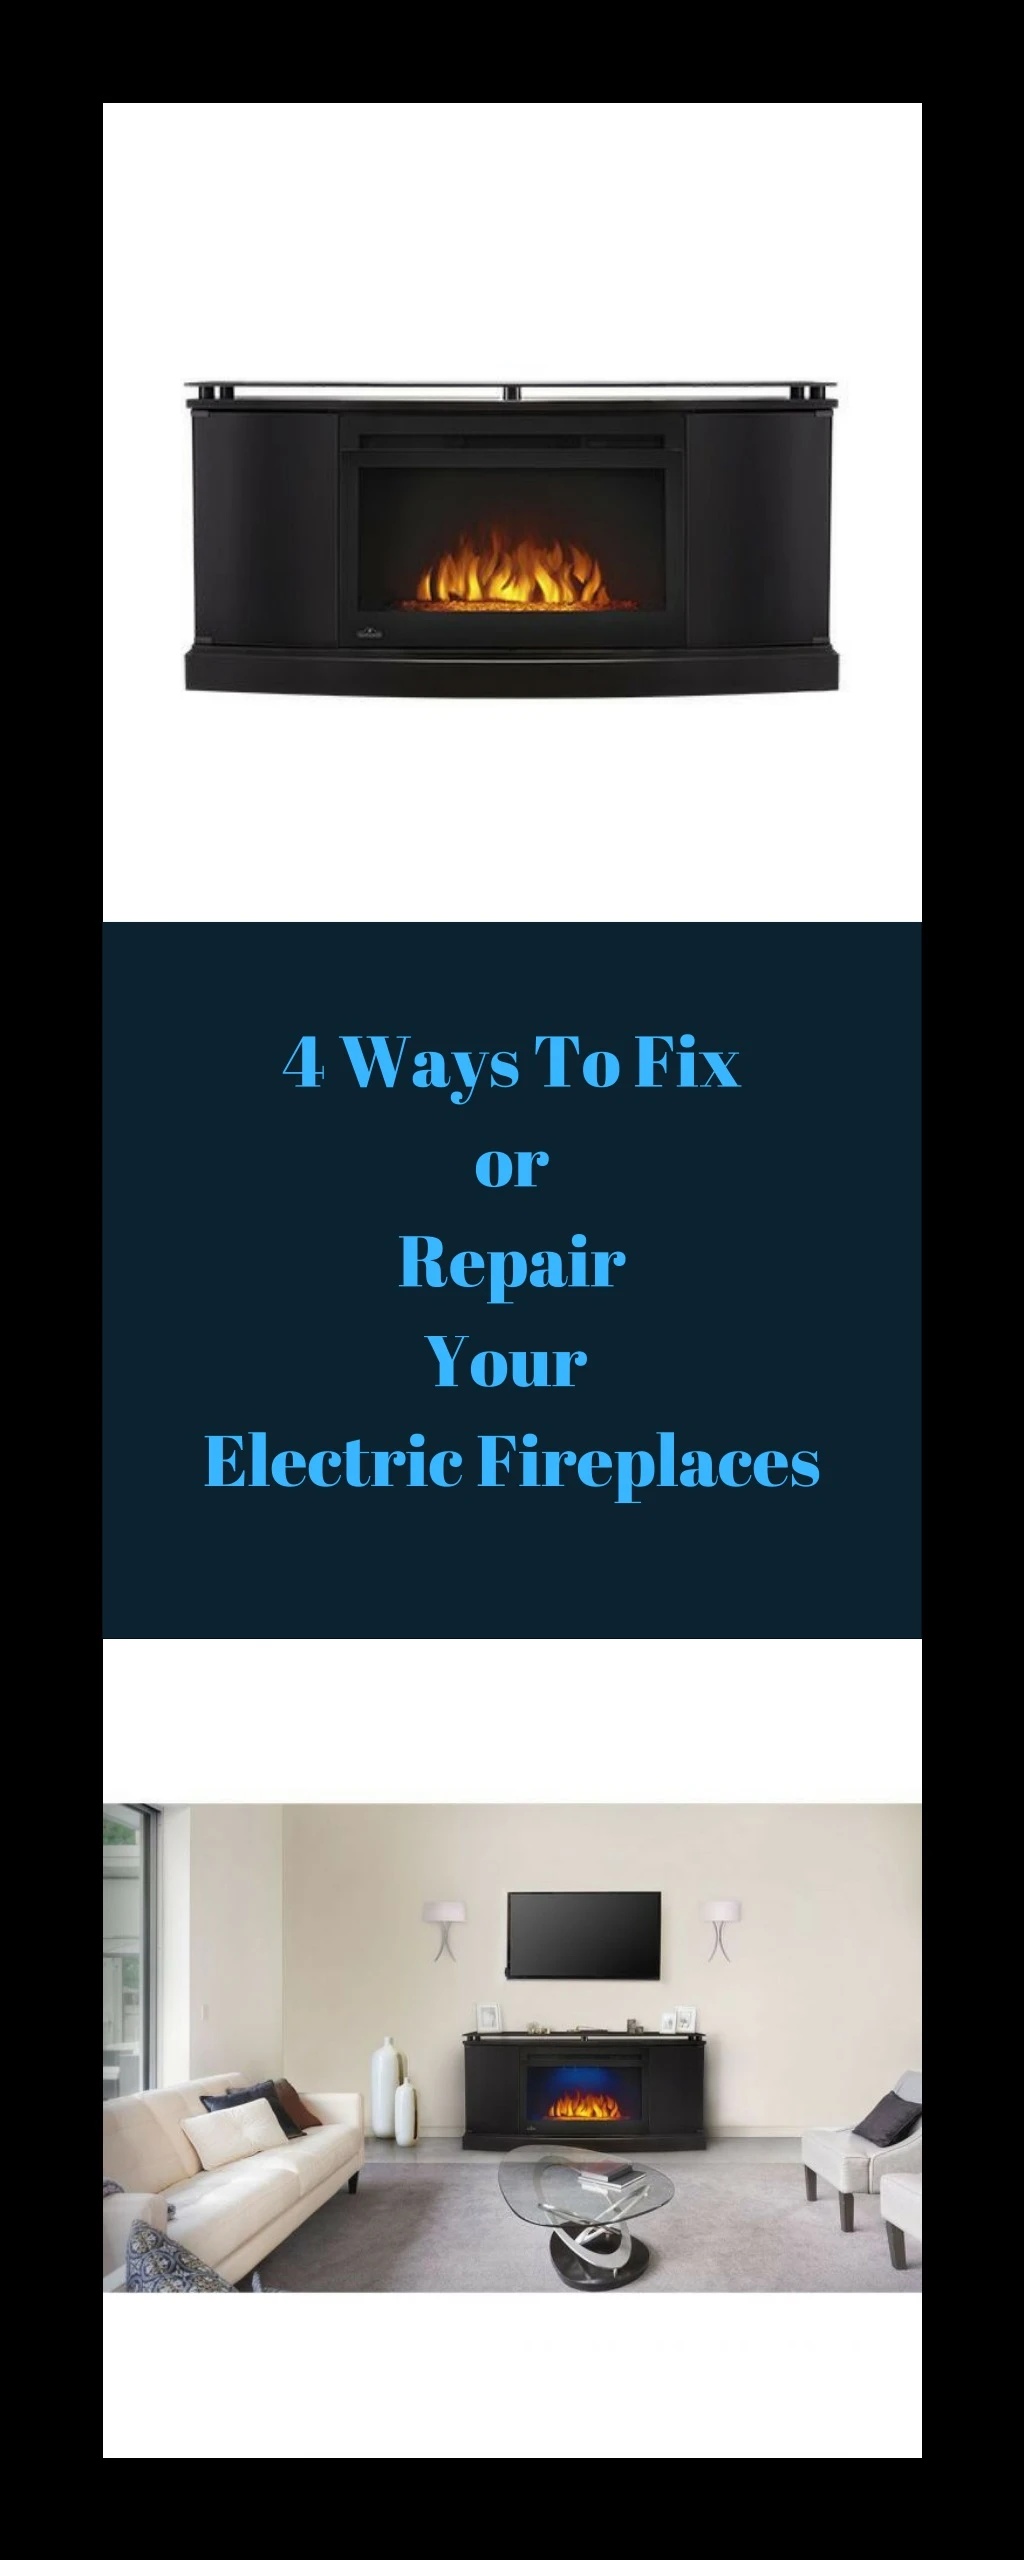 4 ways to fix or repair your electric fireplaces